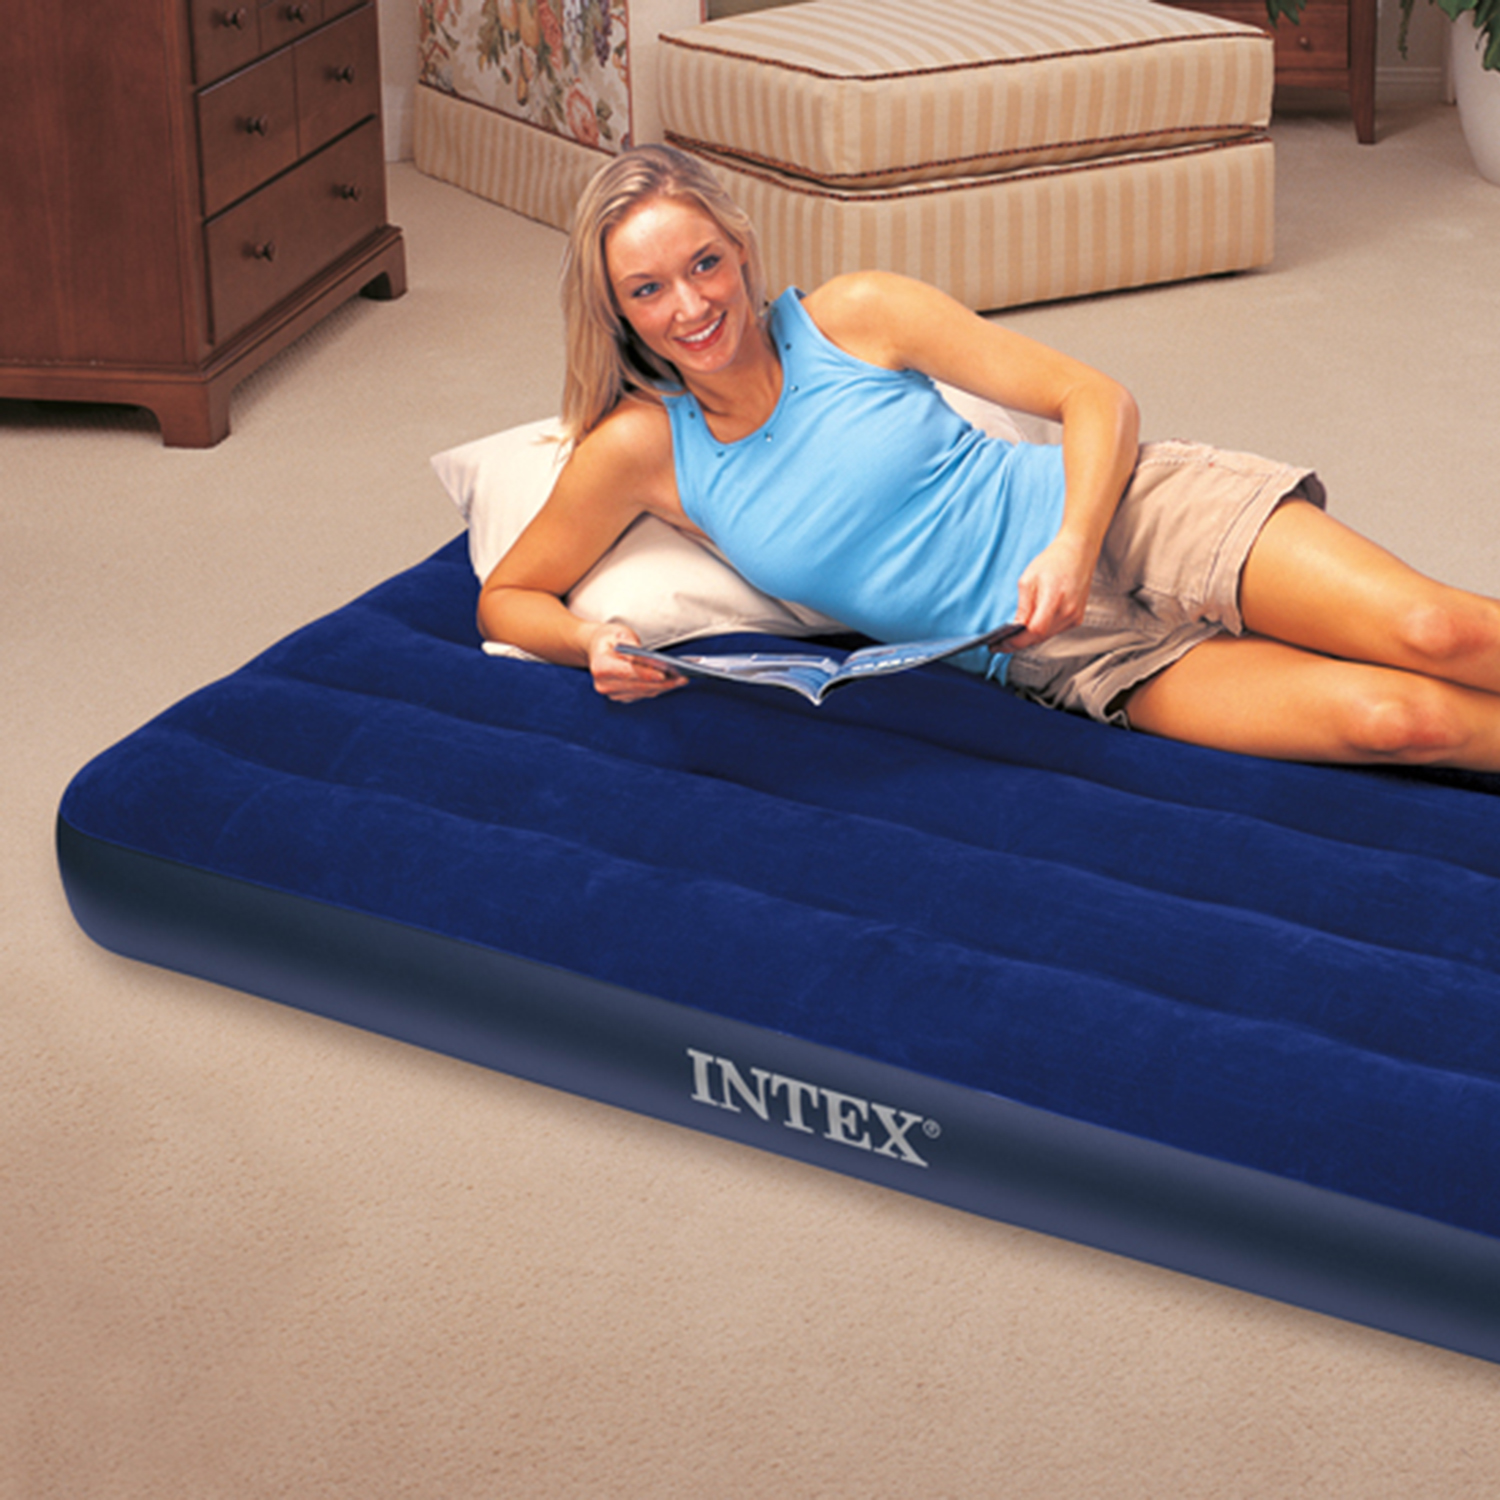 Intex 8.75" Classic Downy Inflatable Airbed Mattress, Twin - image 4 of 6